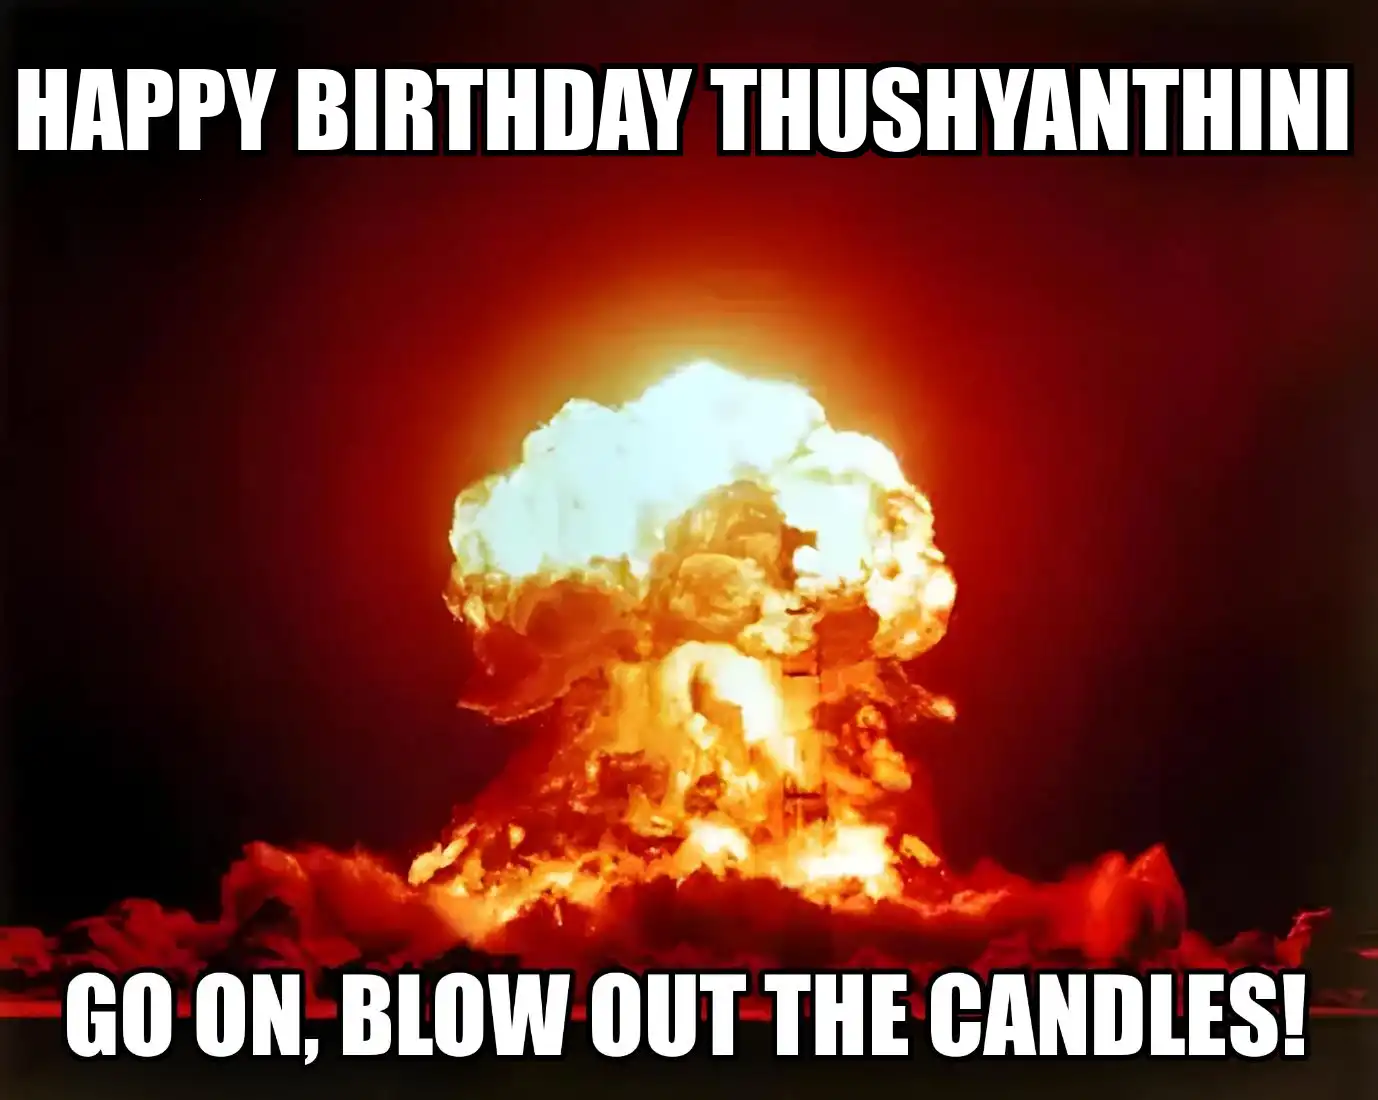 Happy Birthday Thushyanthini Go On Blow Out The Candles Meme